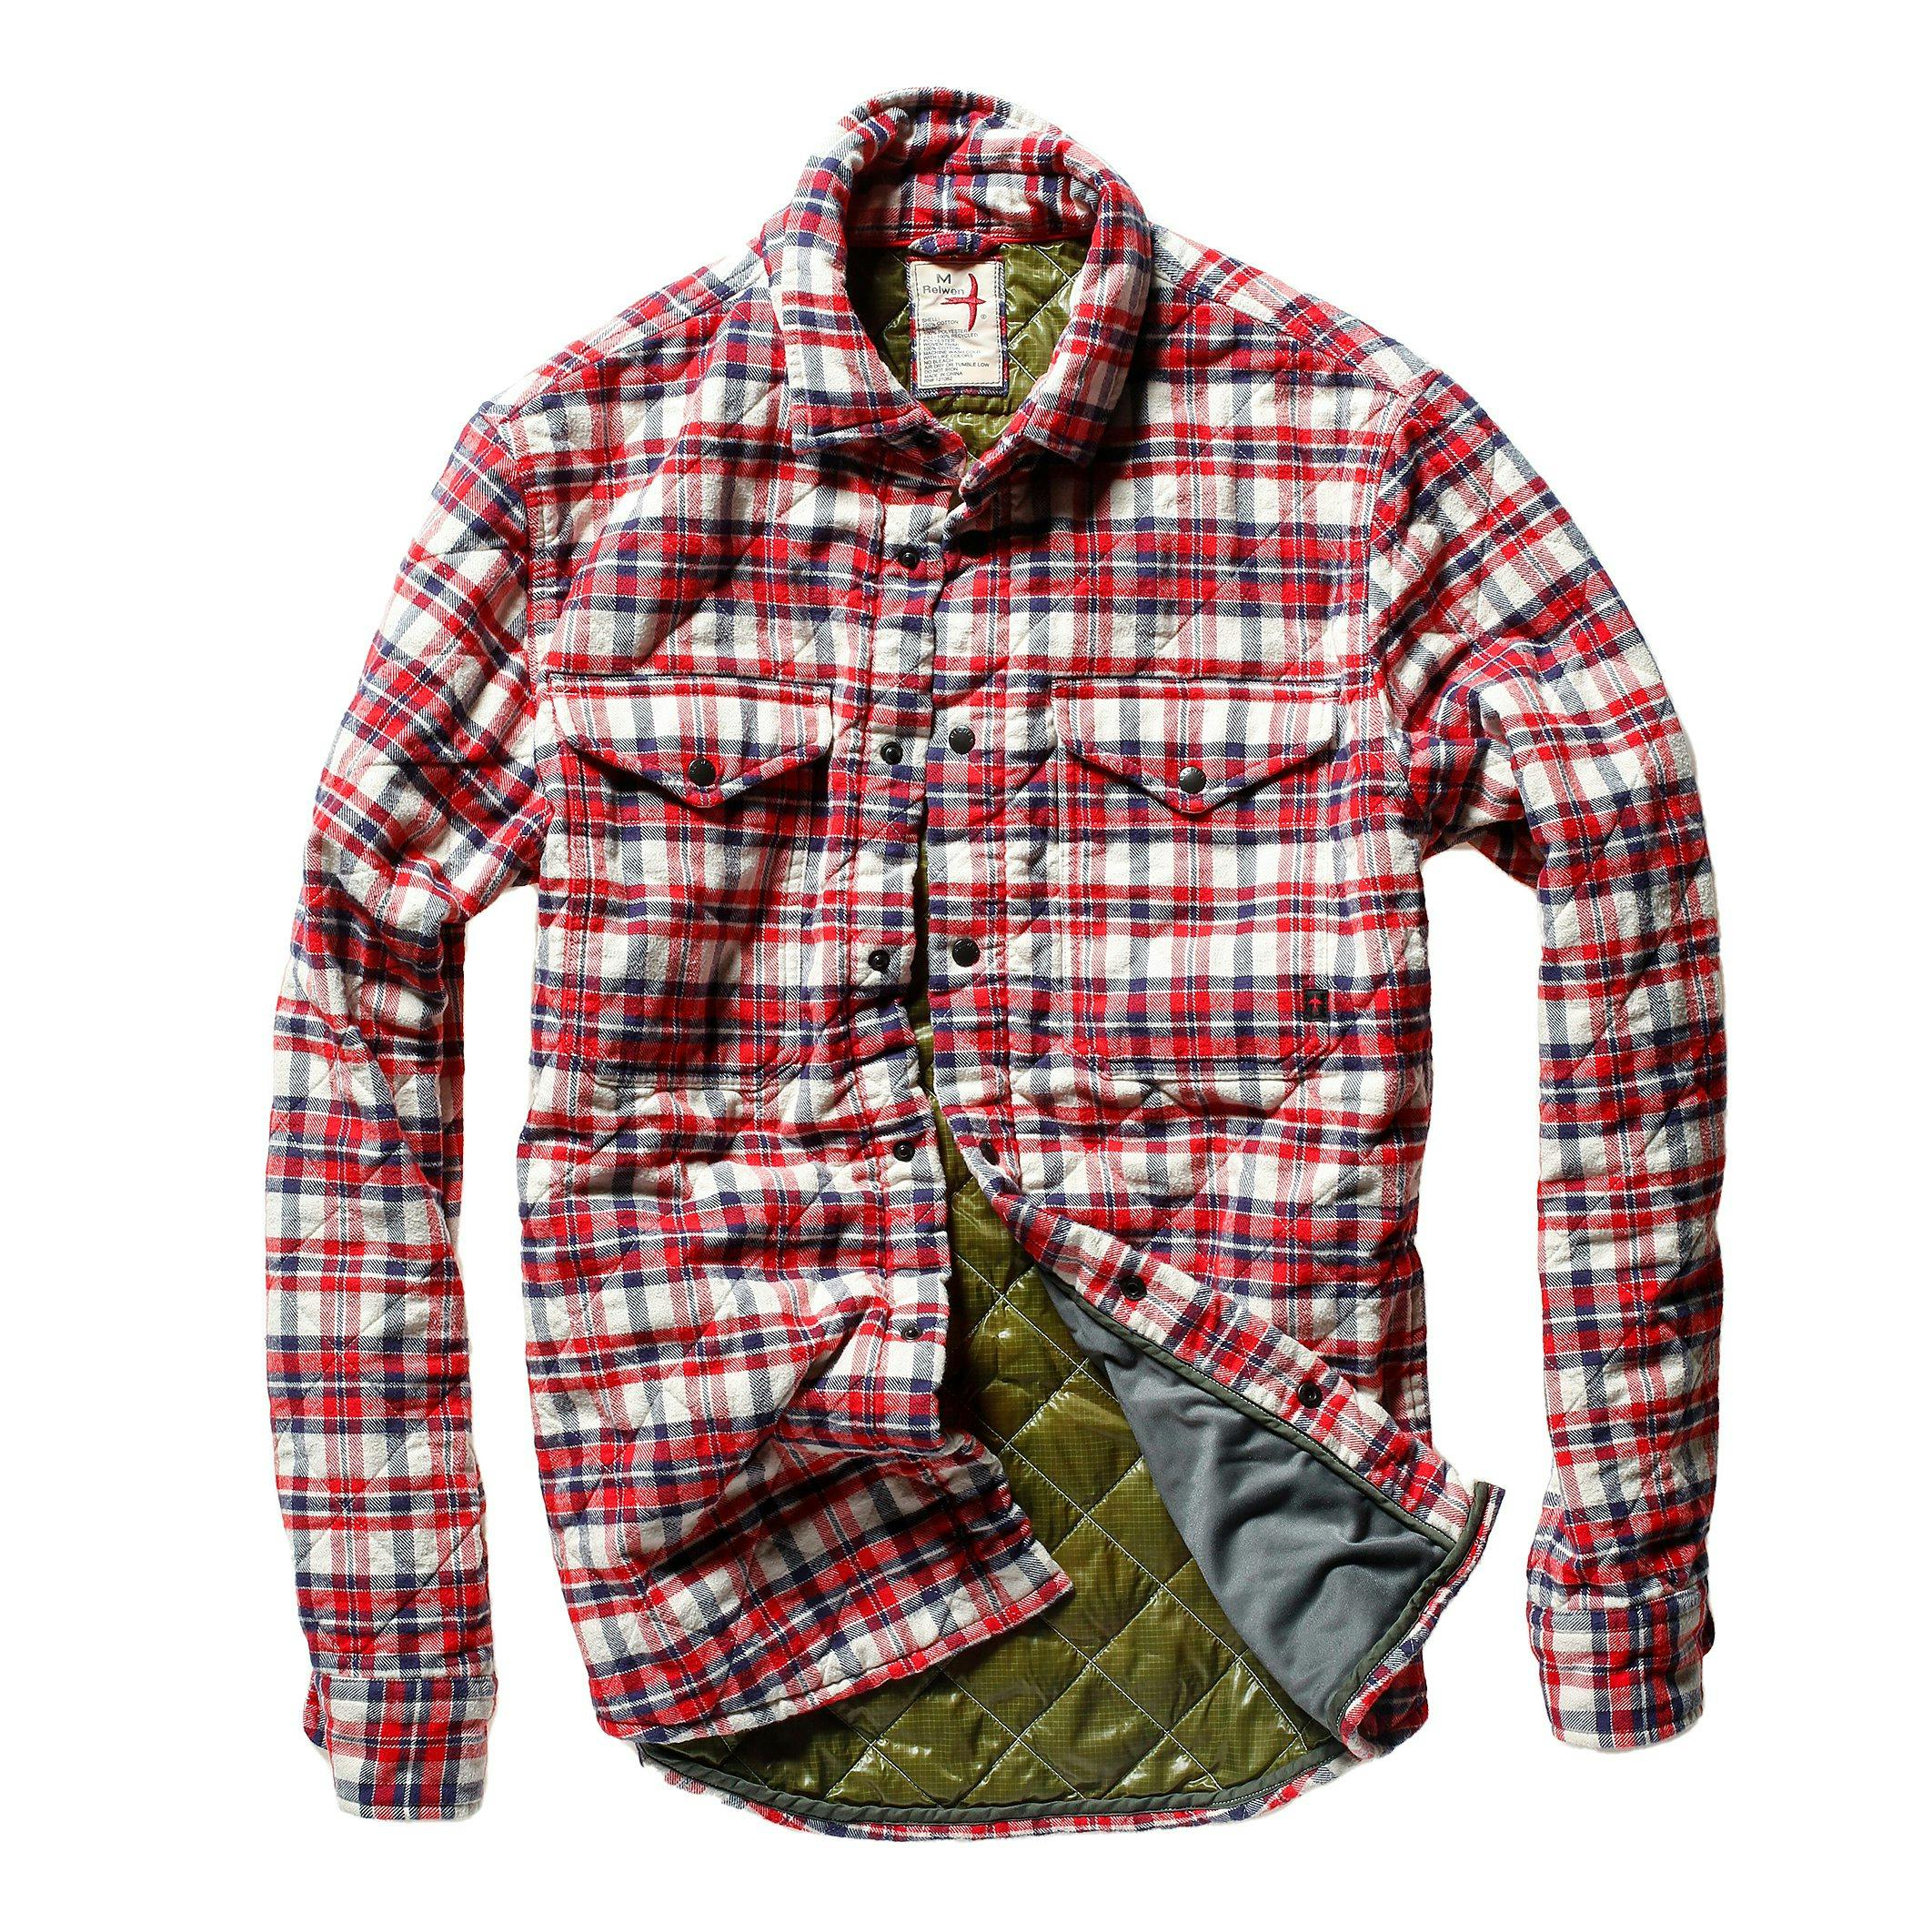 https://huckberry.imgix.net/spree/products/716837/original/80937_Relwen_Quilted_Flannel_Shirt_Jacket_White-Red-Blue_Plaid_01_.jpg?auto=format%2C%20compress&crop=top&fit=fill&cs=tinysrgb&ar=4%3A5&fill=solid&fill-color=FFFFFF&ixlib=react-9.8.1